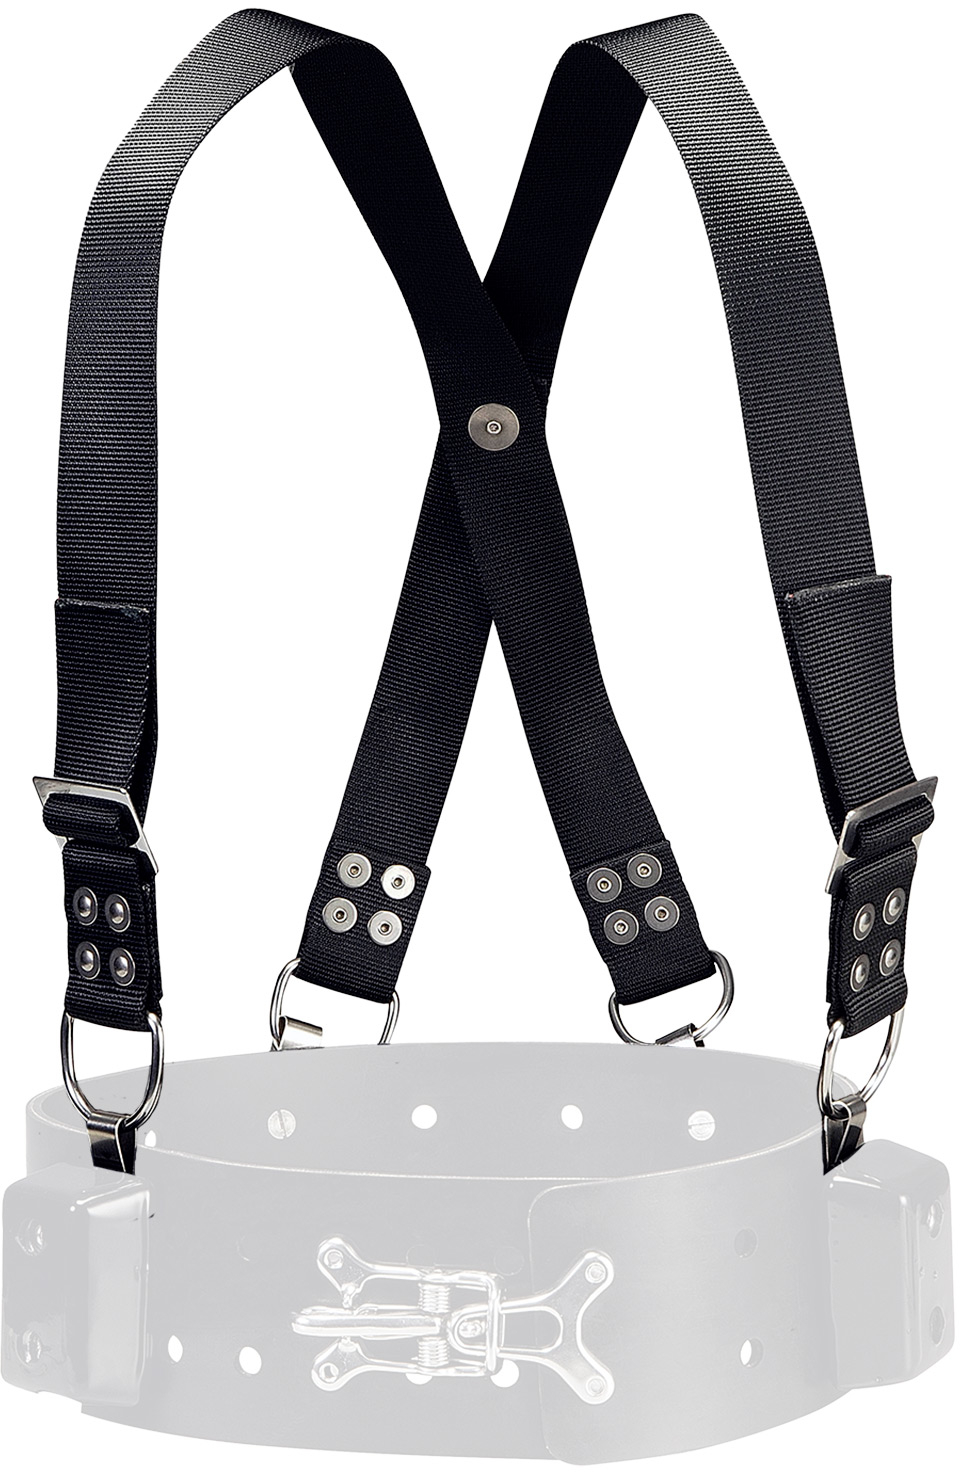 Dolphin Tech by IST Shoulder Straps for Commercial Diving Belt